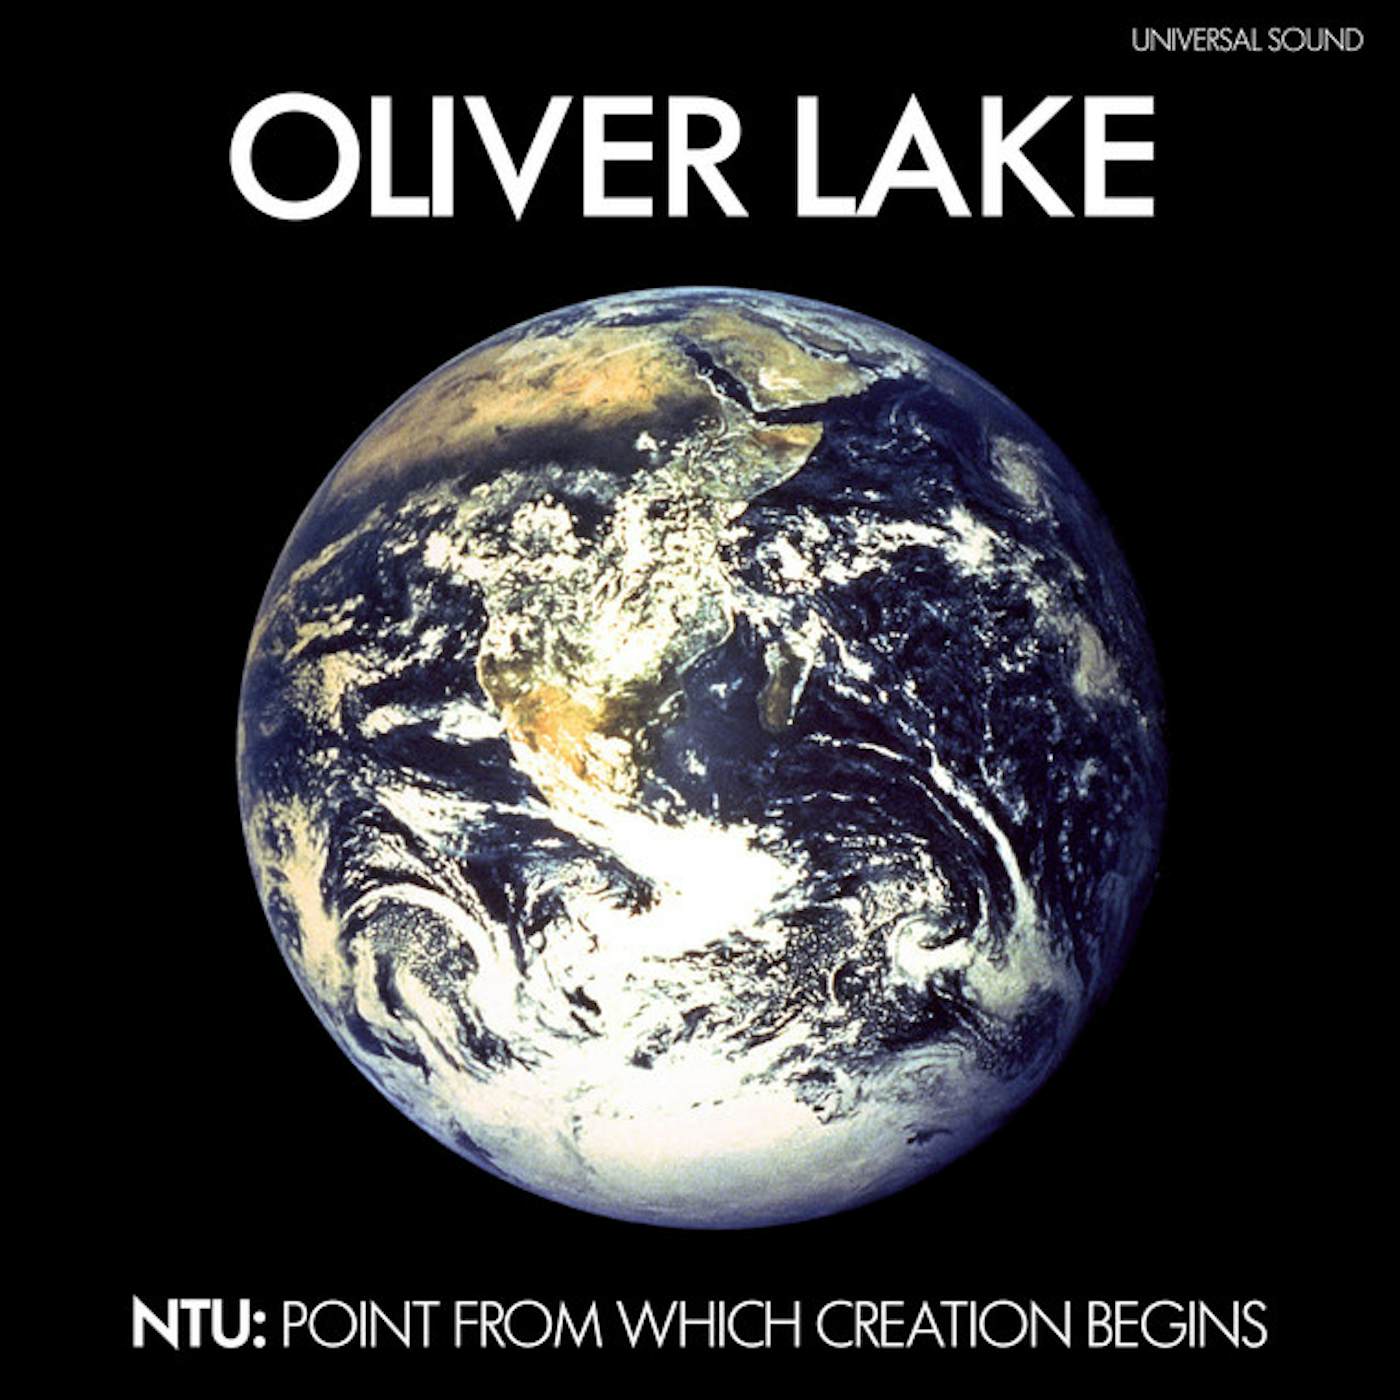 Oliver Lake Ntu: The Point From Which Creation Begins Vinyl Record